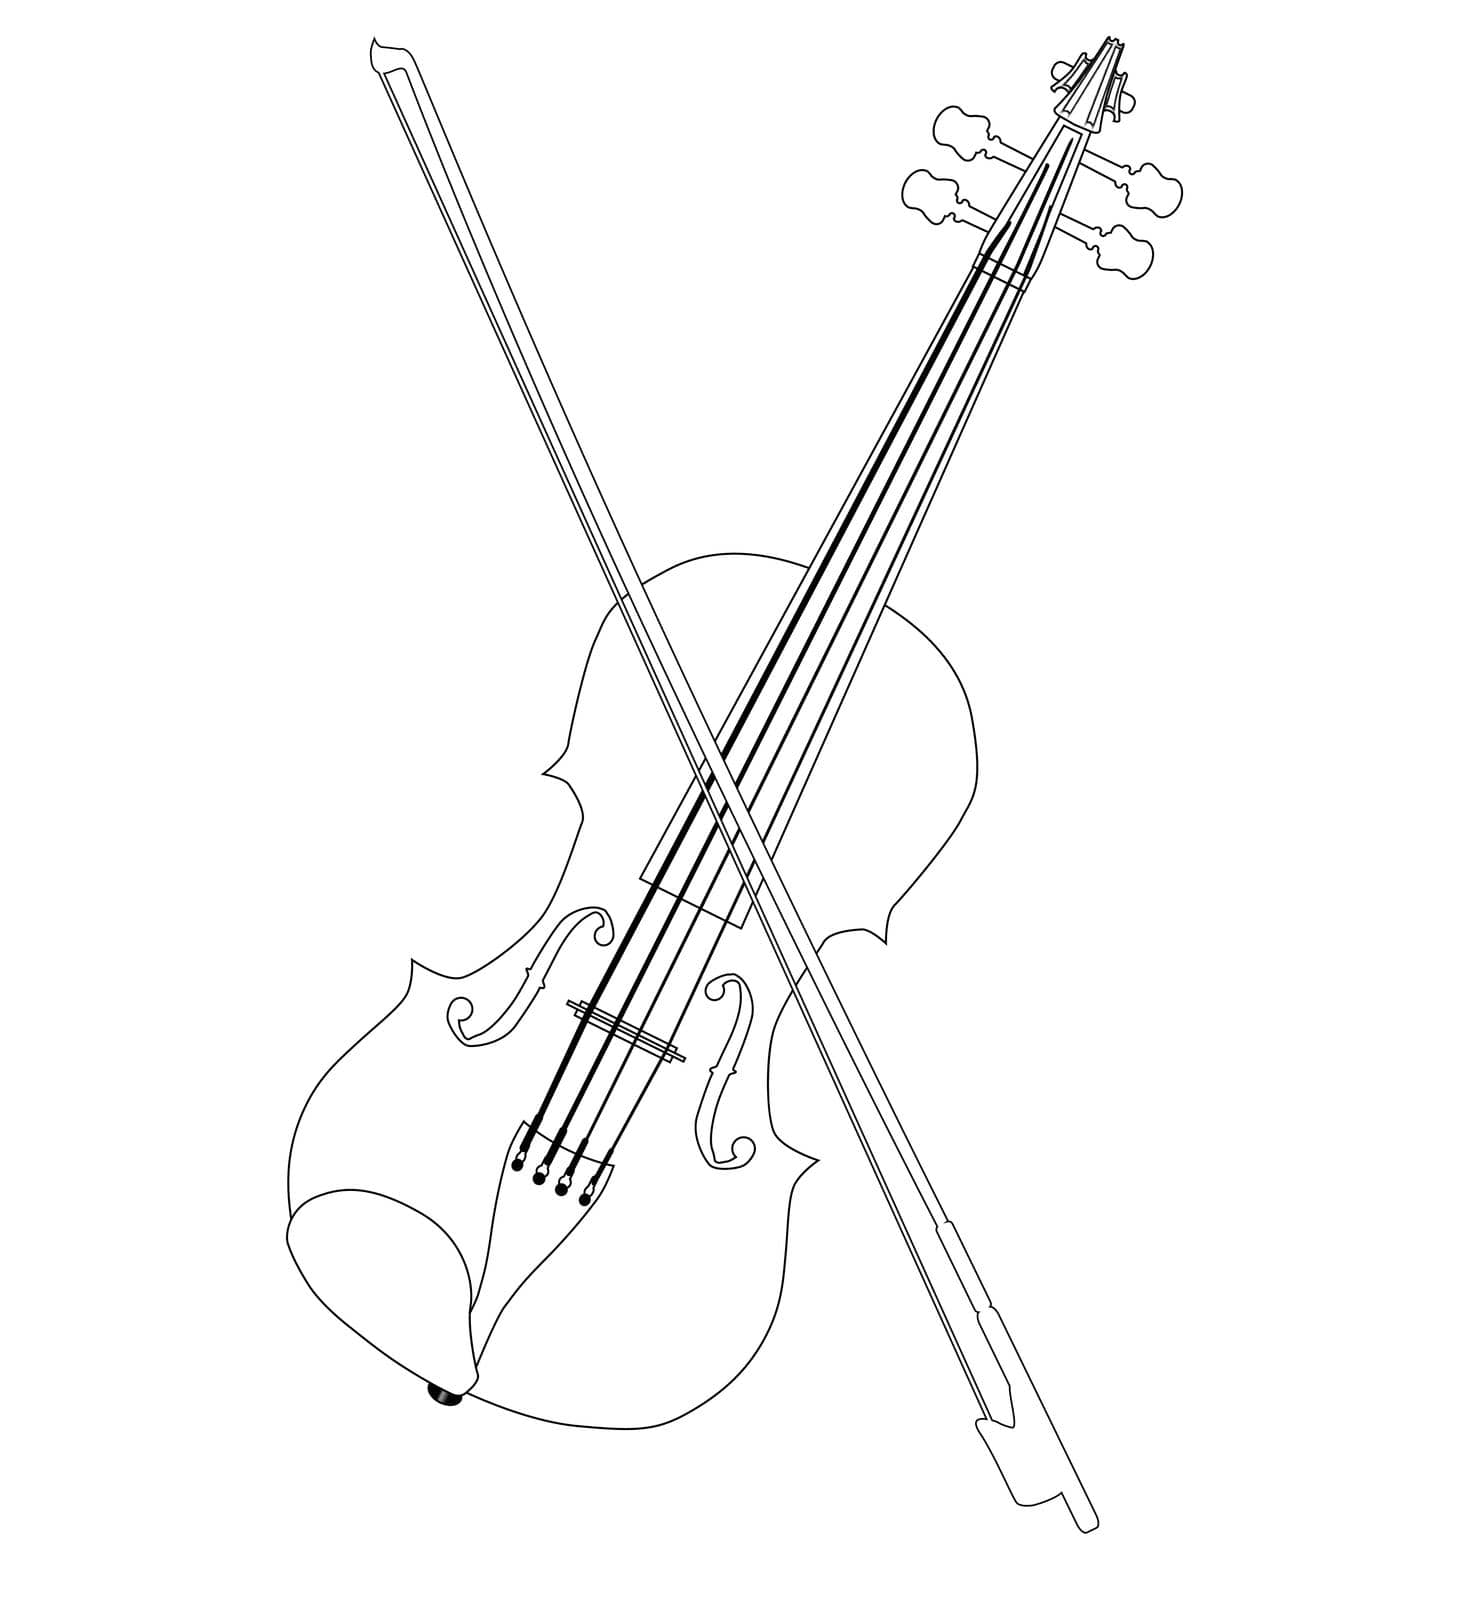 A typical violin and bow in black line drawing isolated over a white background